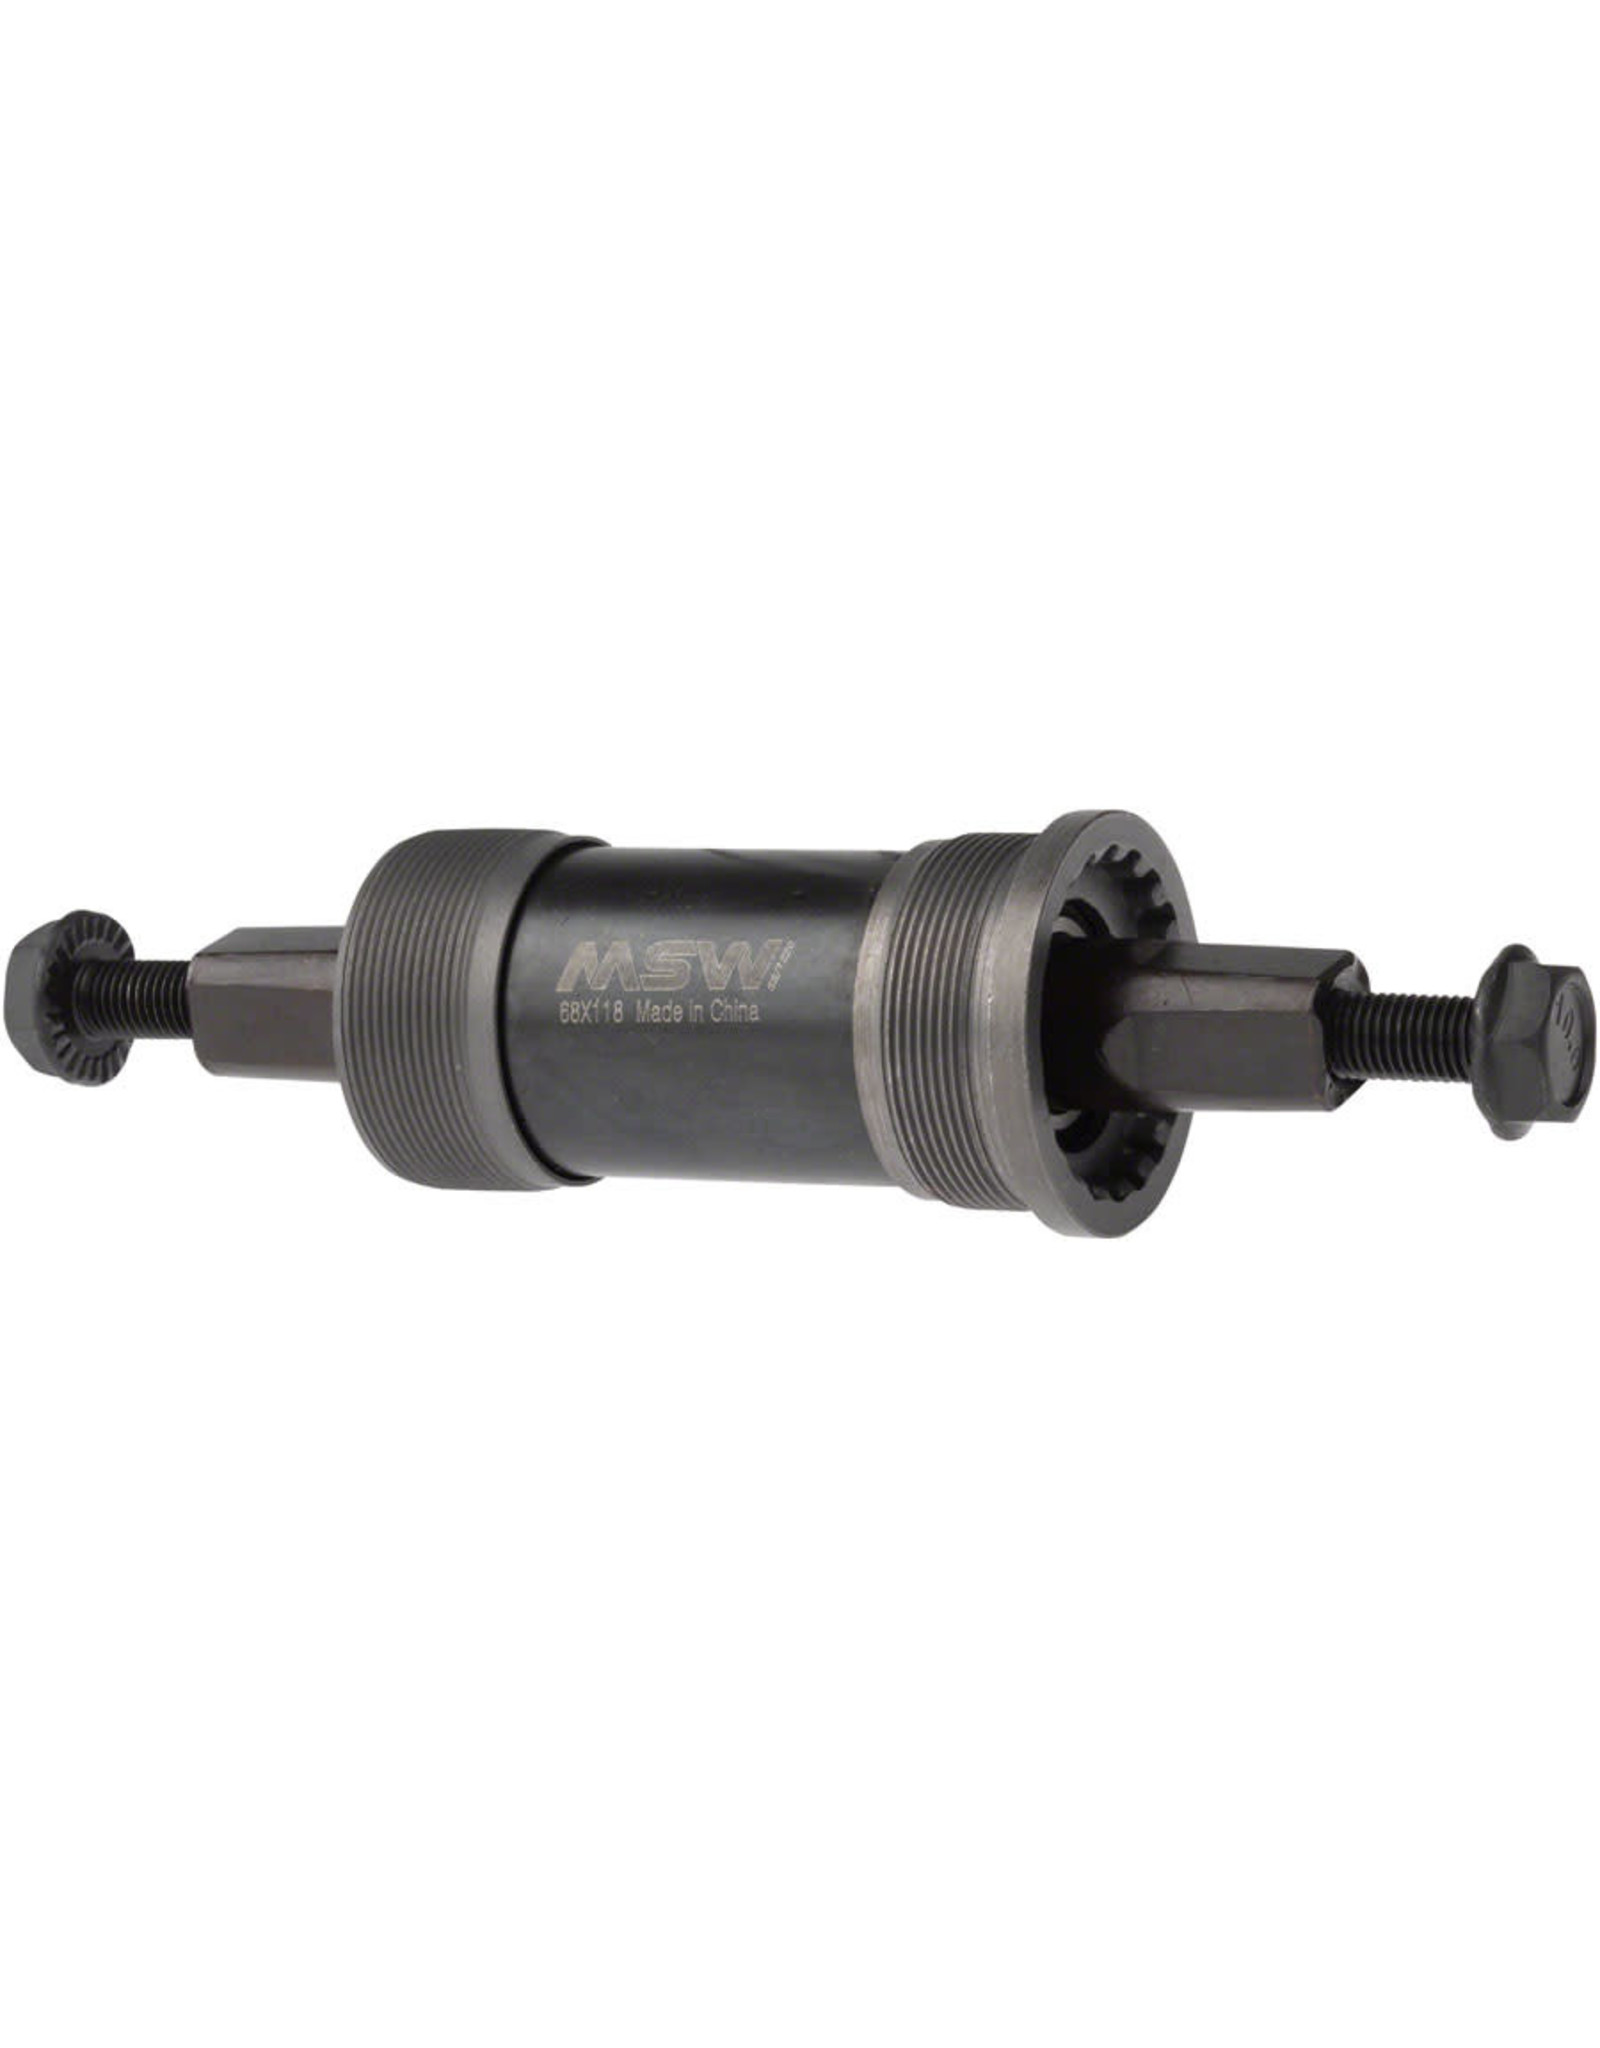 MSW MSW ST100 Square Taper English Bottom Bracket